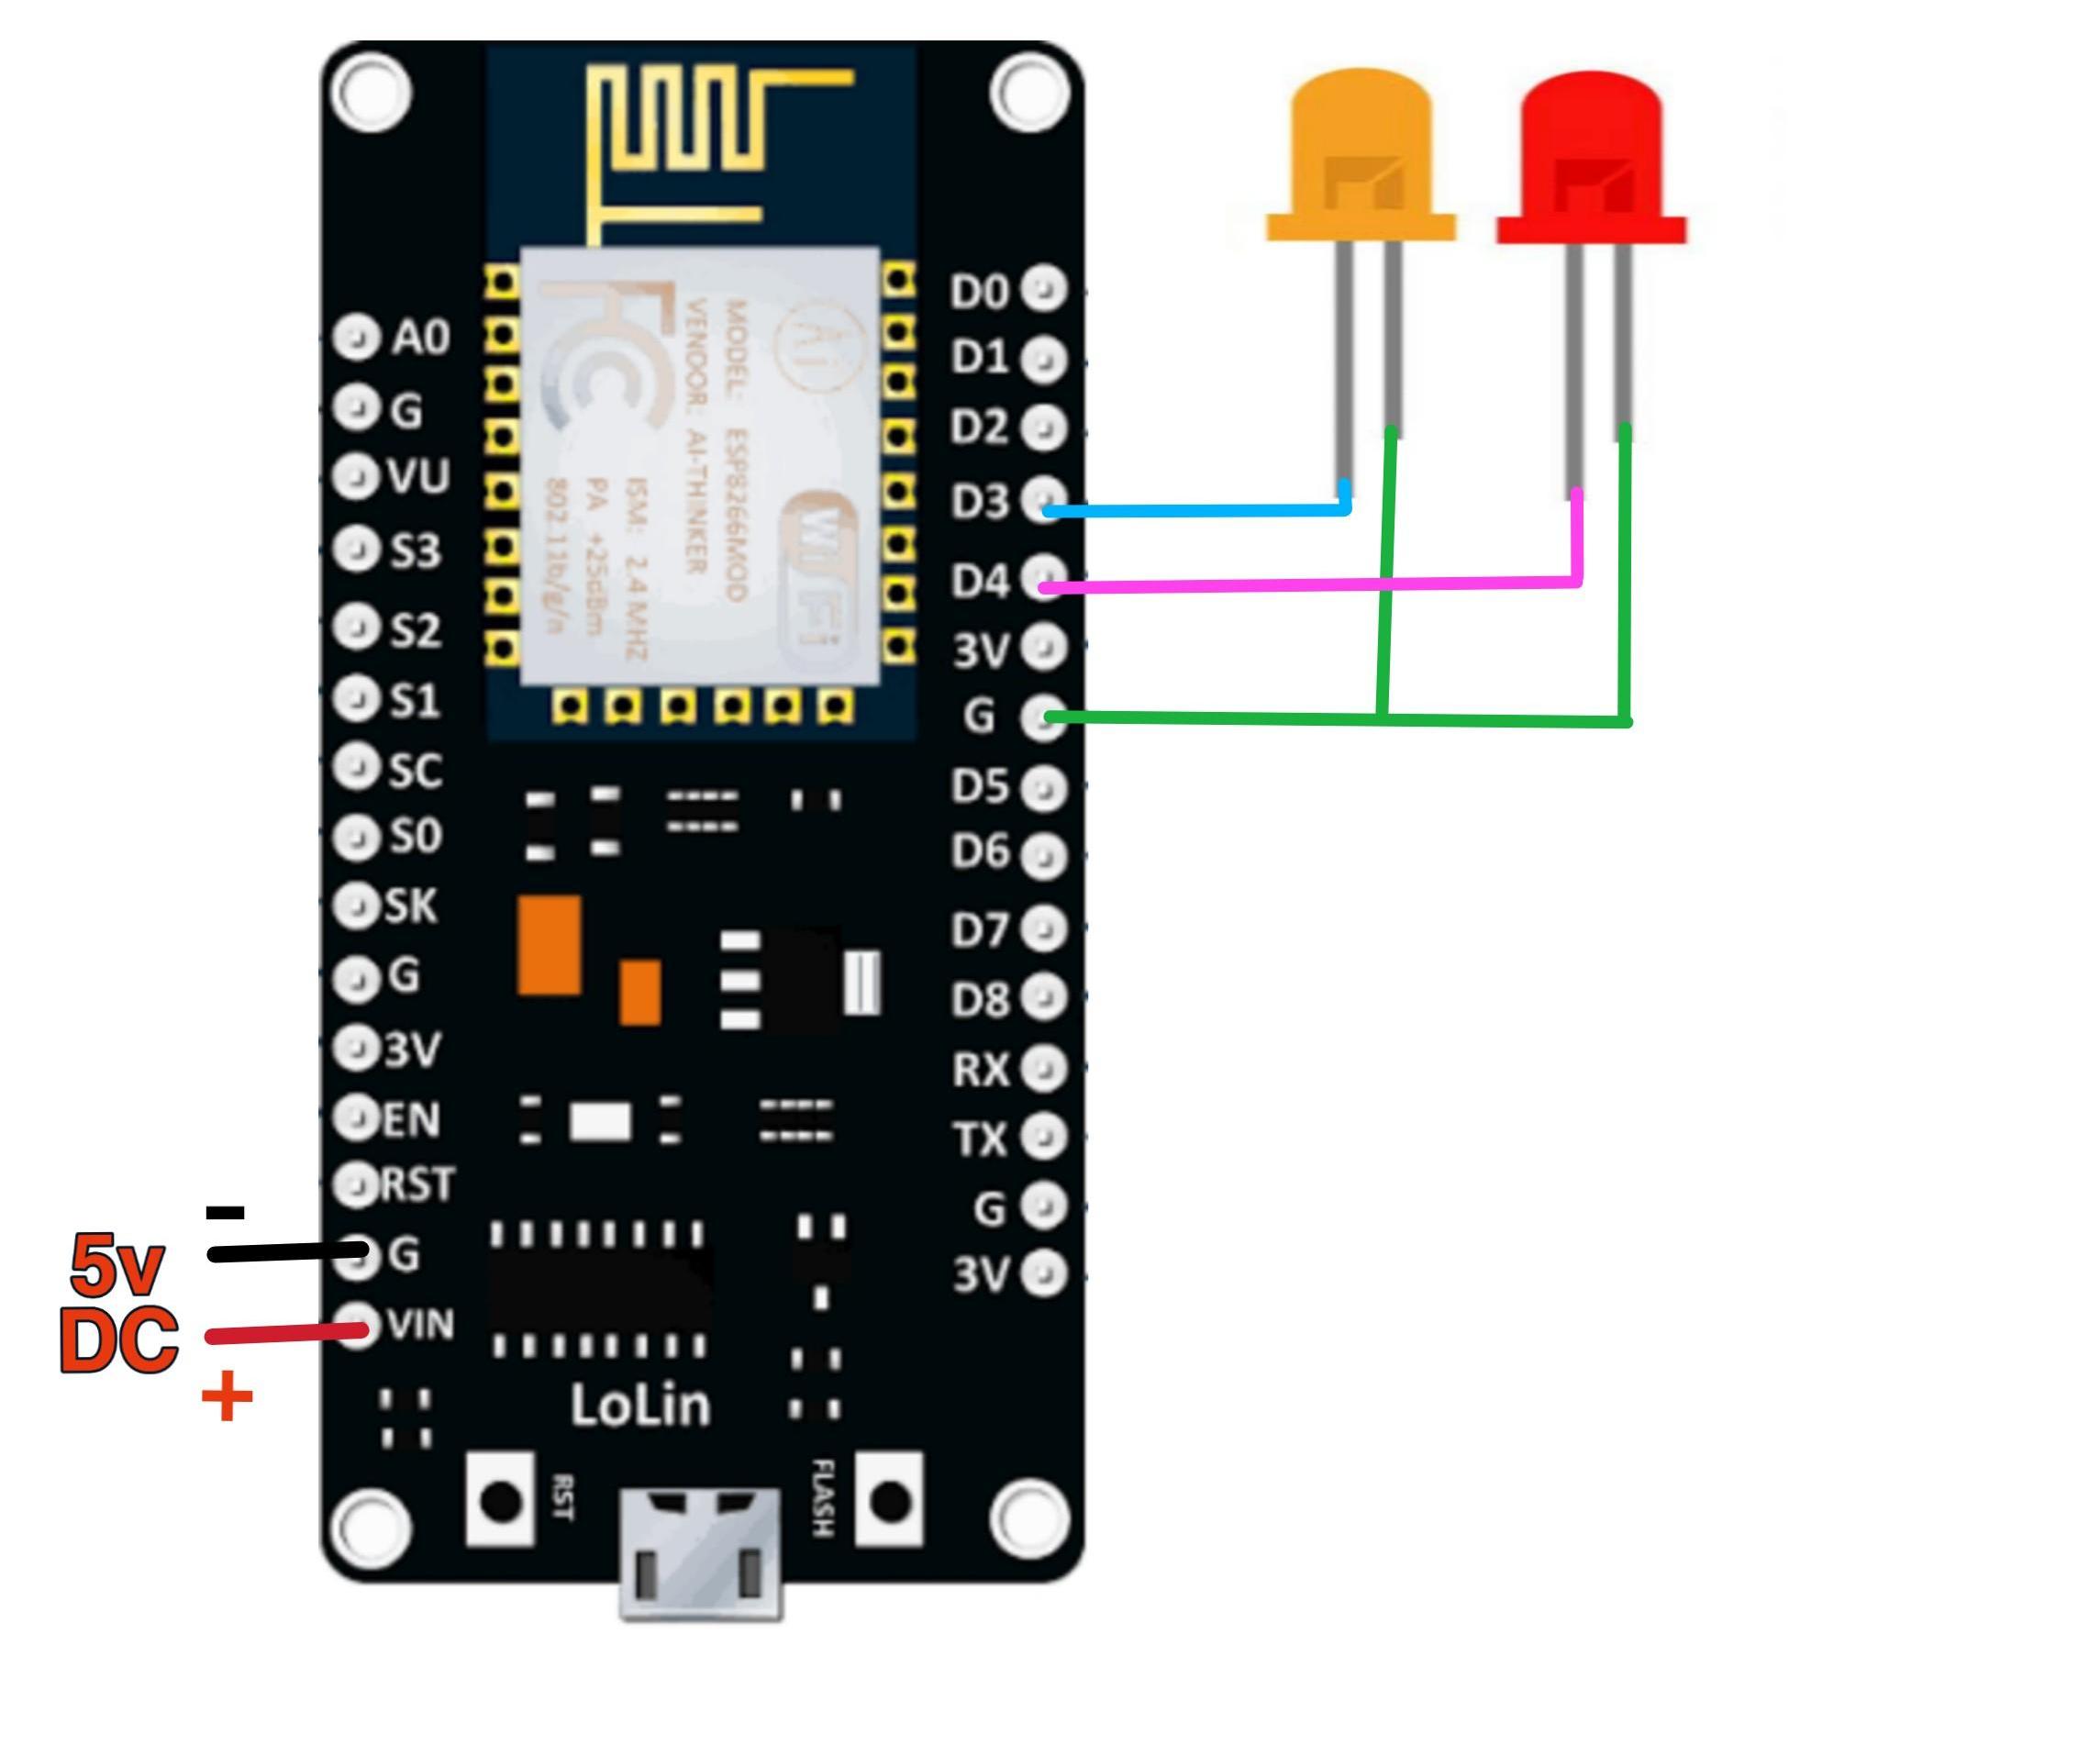 Simple Wi-Fi Controlled LED Using Nodemcu in Access Point(AP) Mode.